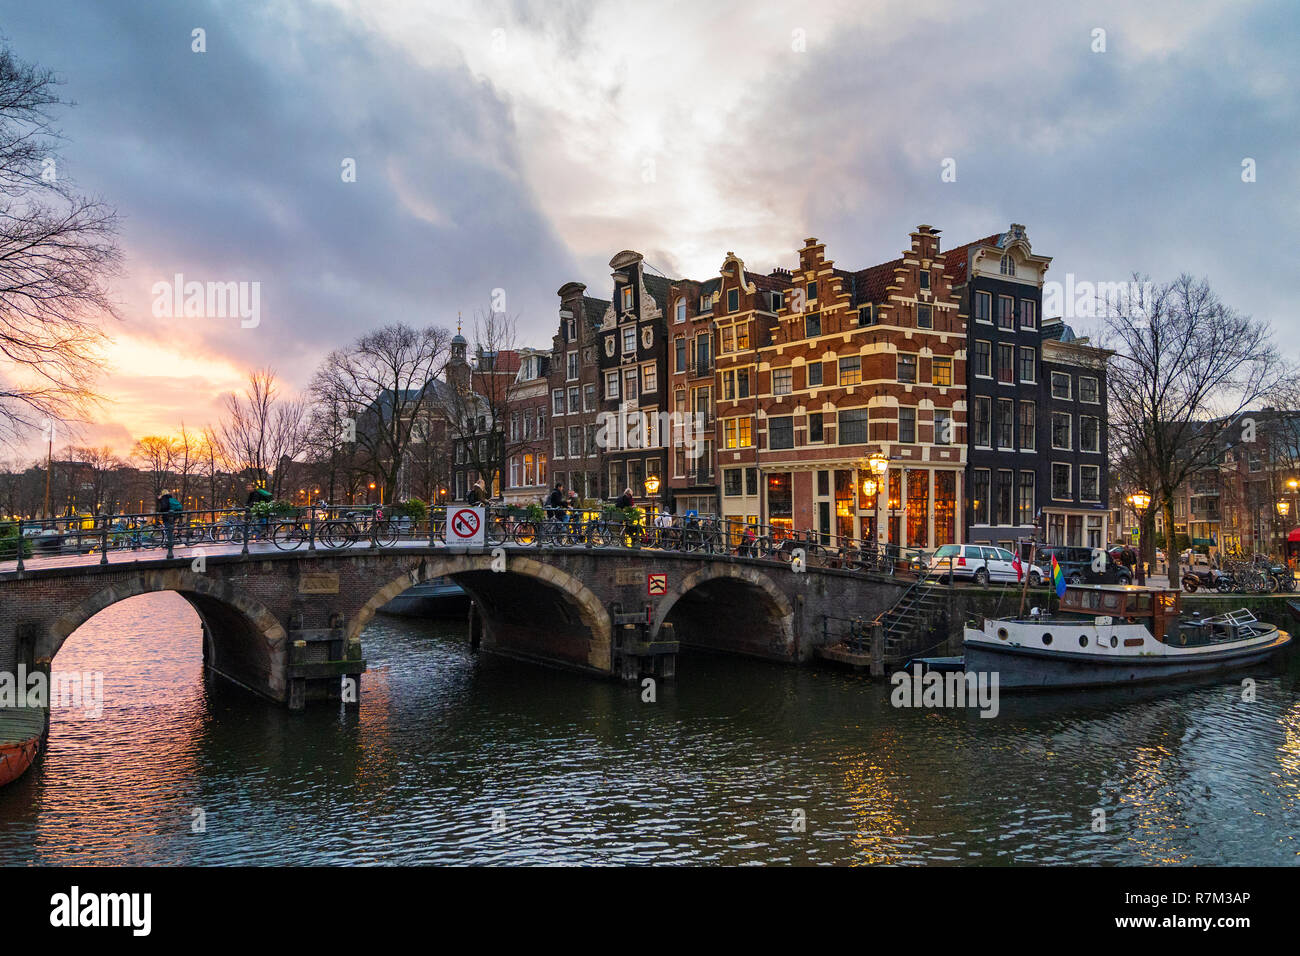 Evening view of Brouwersgracht and Prinsengracht canals in Amsterdam, Netherlands Stock Photo